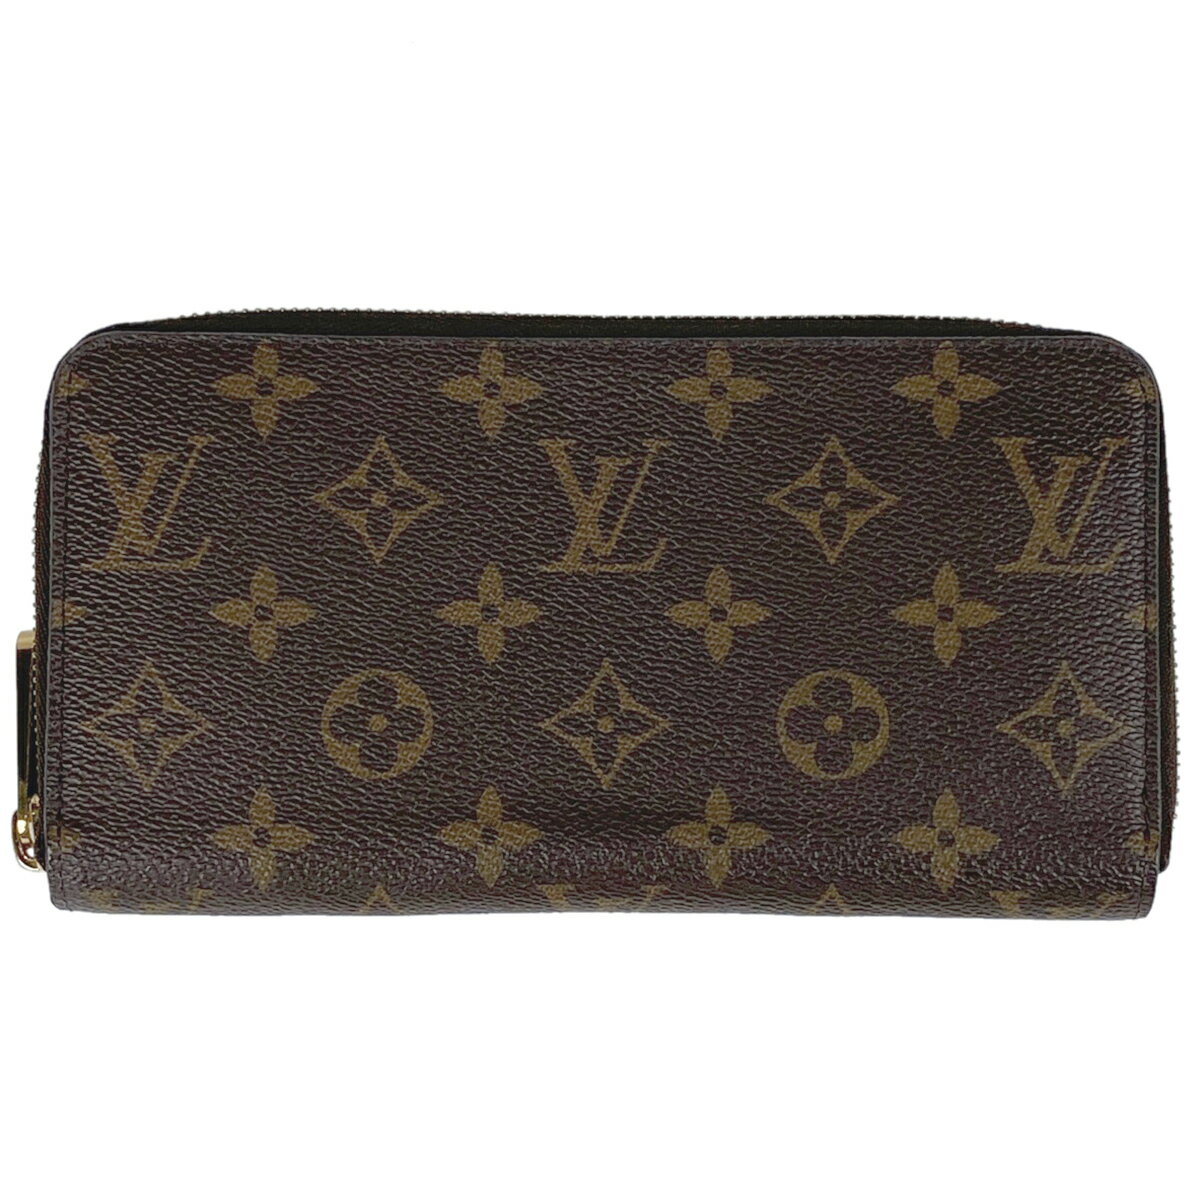 12OFF ybsOzCEBg Louis Vuitton Wbs[ EHbg D K EhWbv Eht@Xi[ z mO uE M42616 fB[X yÁz msp29